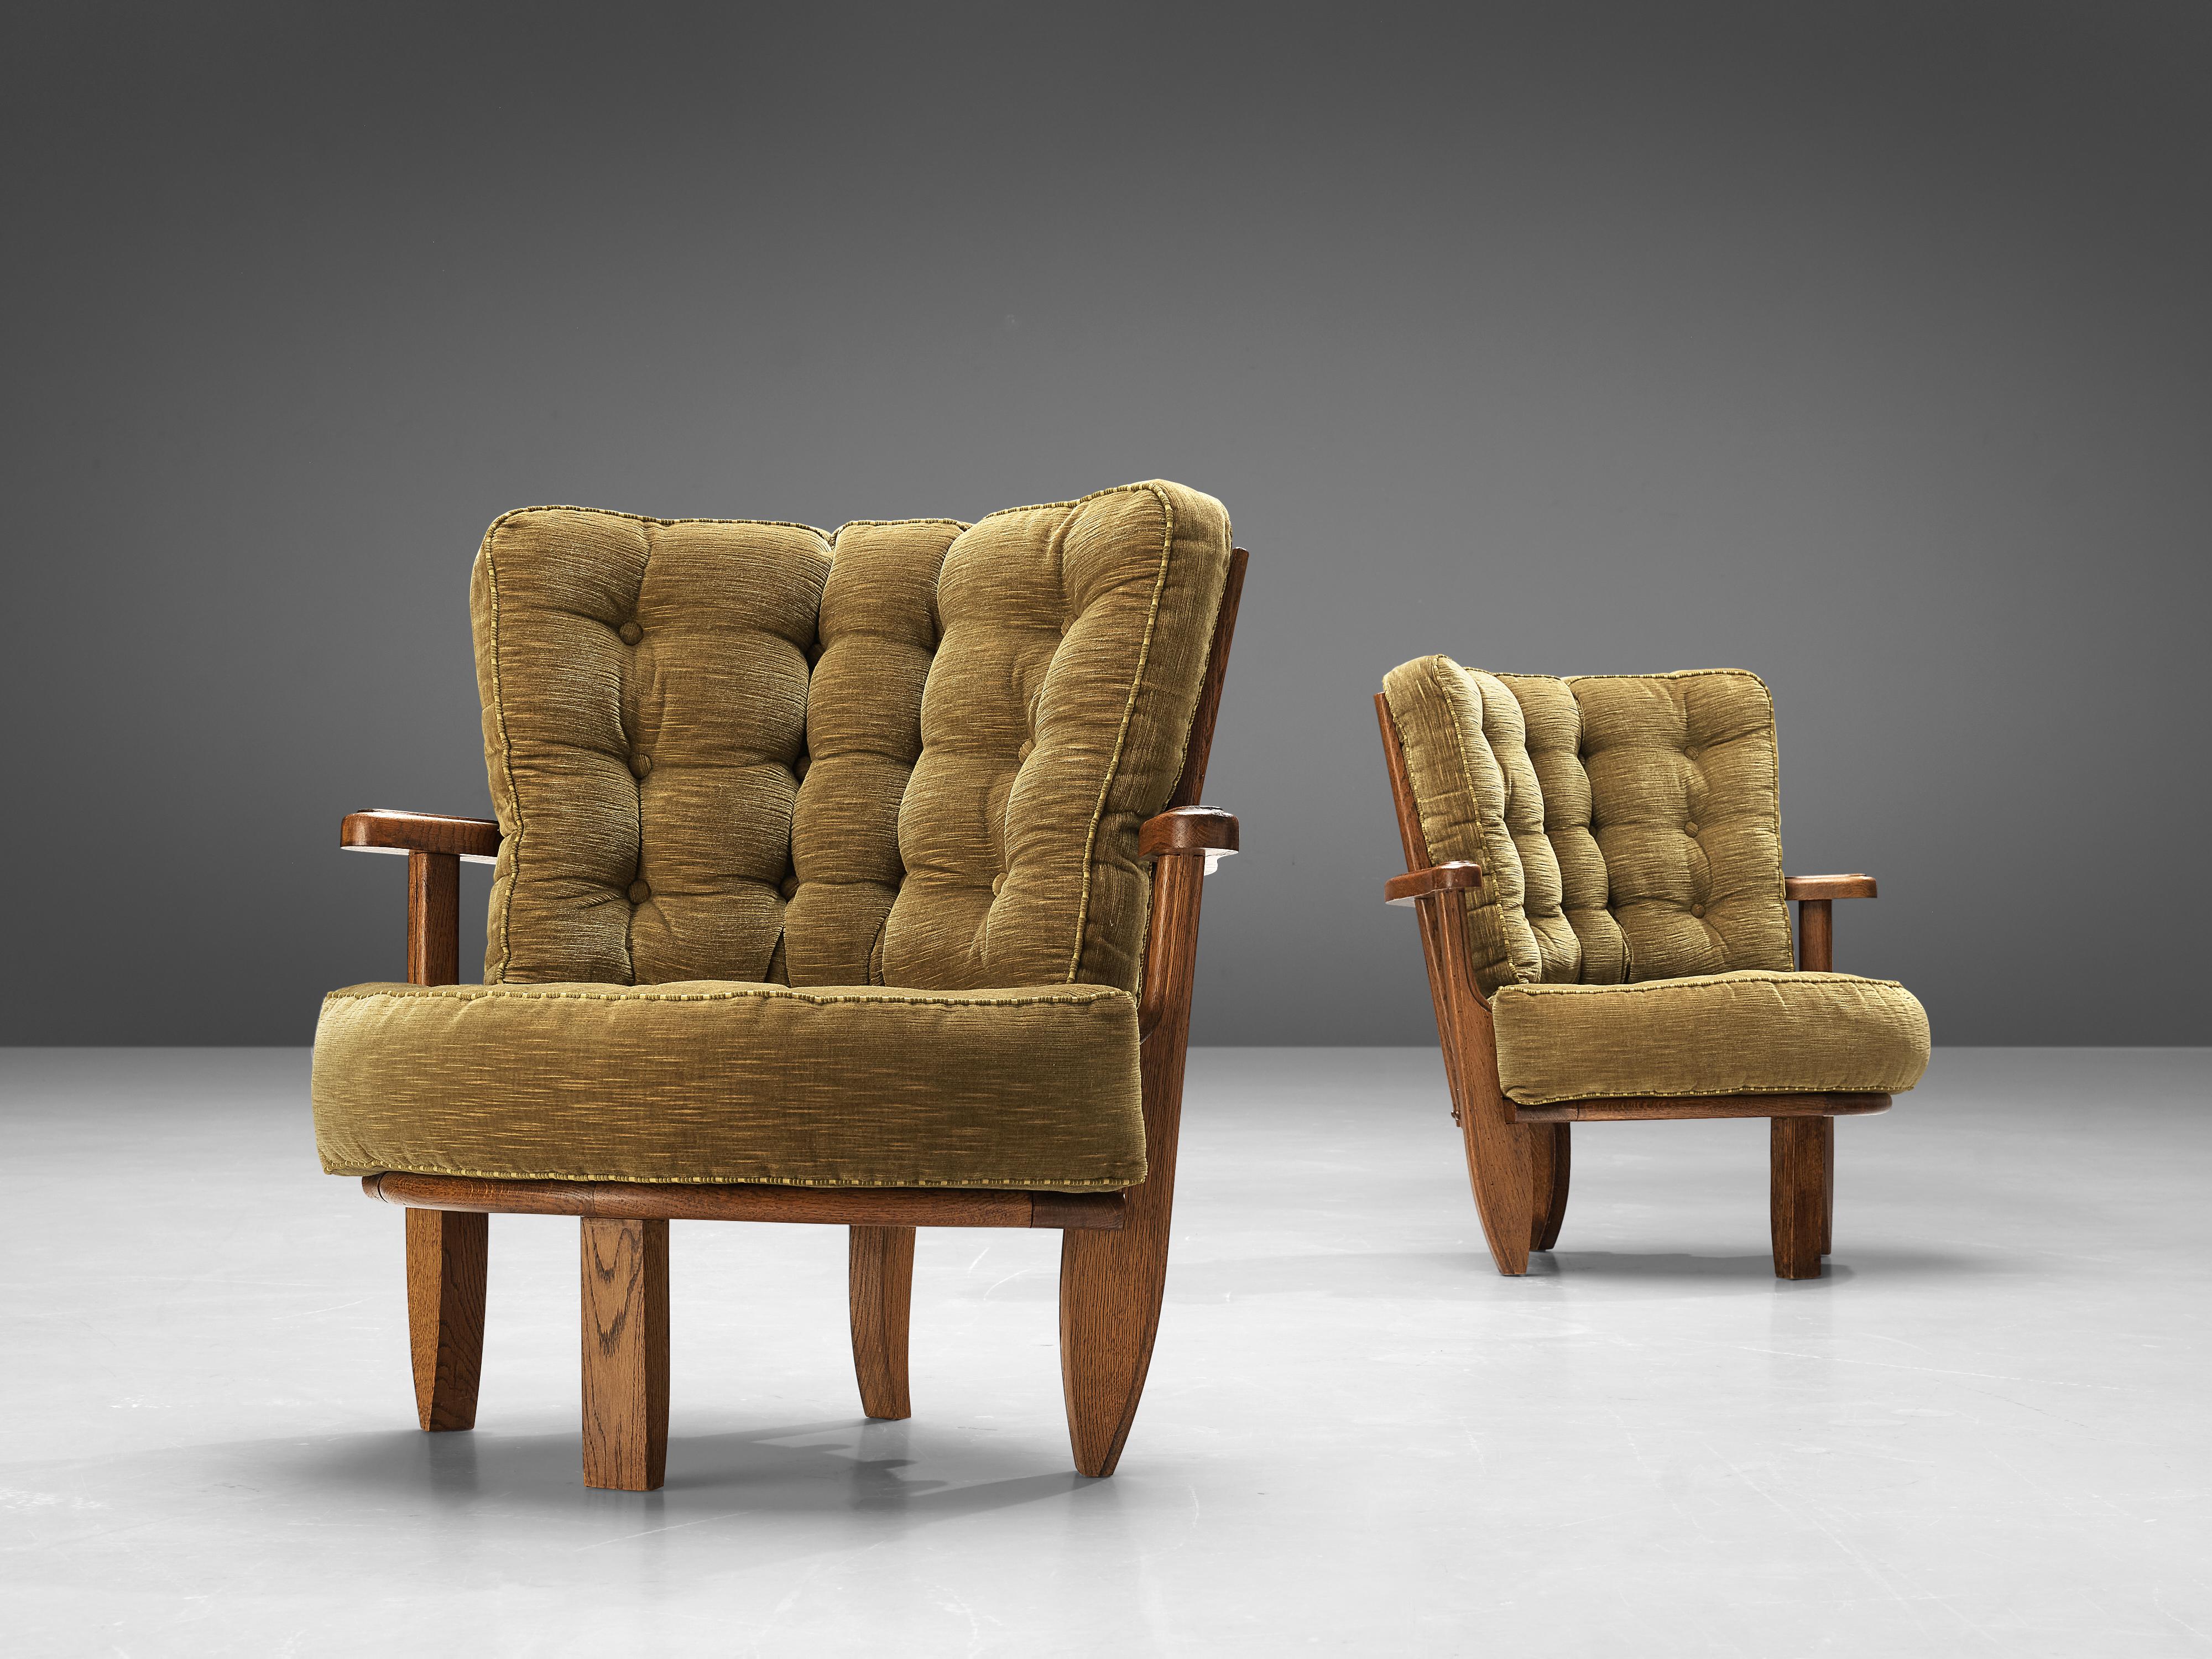 Guillerme et Chambron, pair of lounge chairs 'Tricoteuse', oak, fabric upholstery, France, 1960s 

Guillerme et Chambron designed the 'Tricoteuse' lounge chair in solid oak with the typical characteristic decorative details at the back and